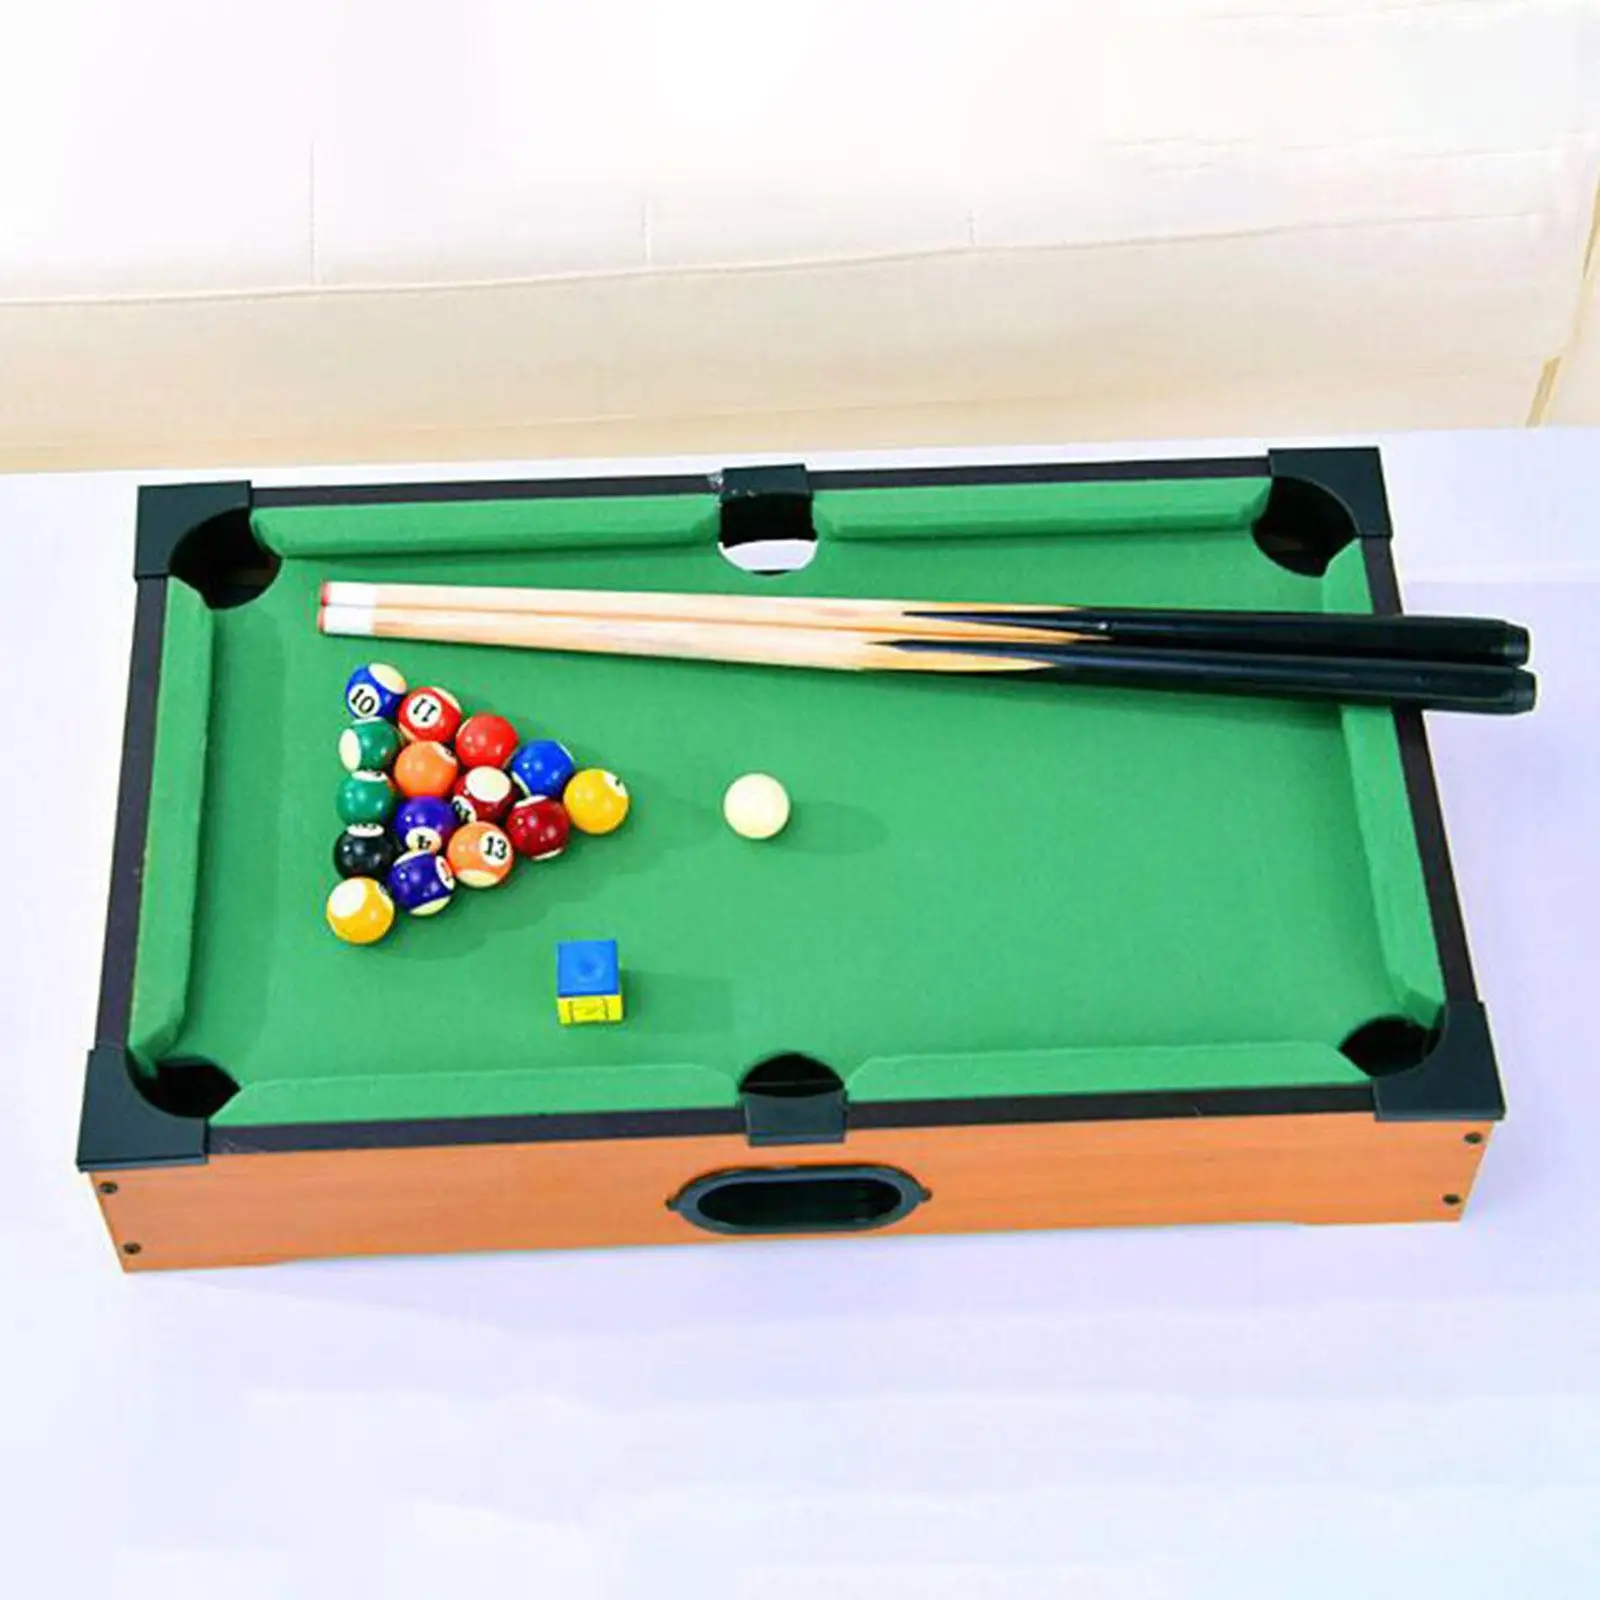 Table Billiards Toy Eye Hand Coordination Cues Home Play Snooker Wood for Playhouse Game Room Party Desktop Family